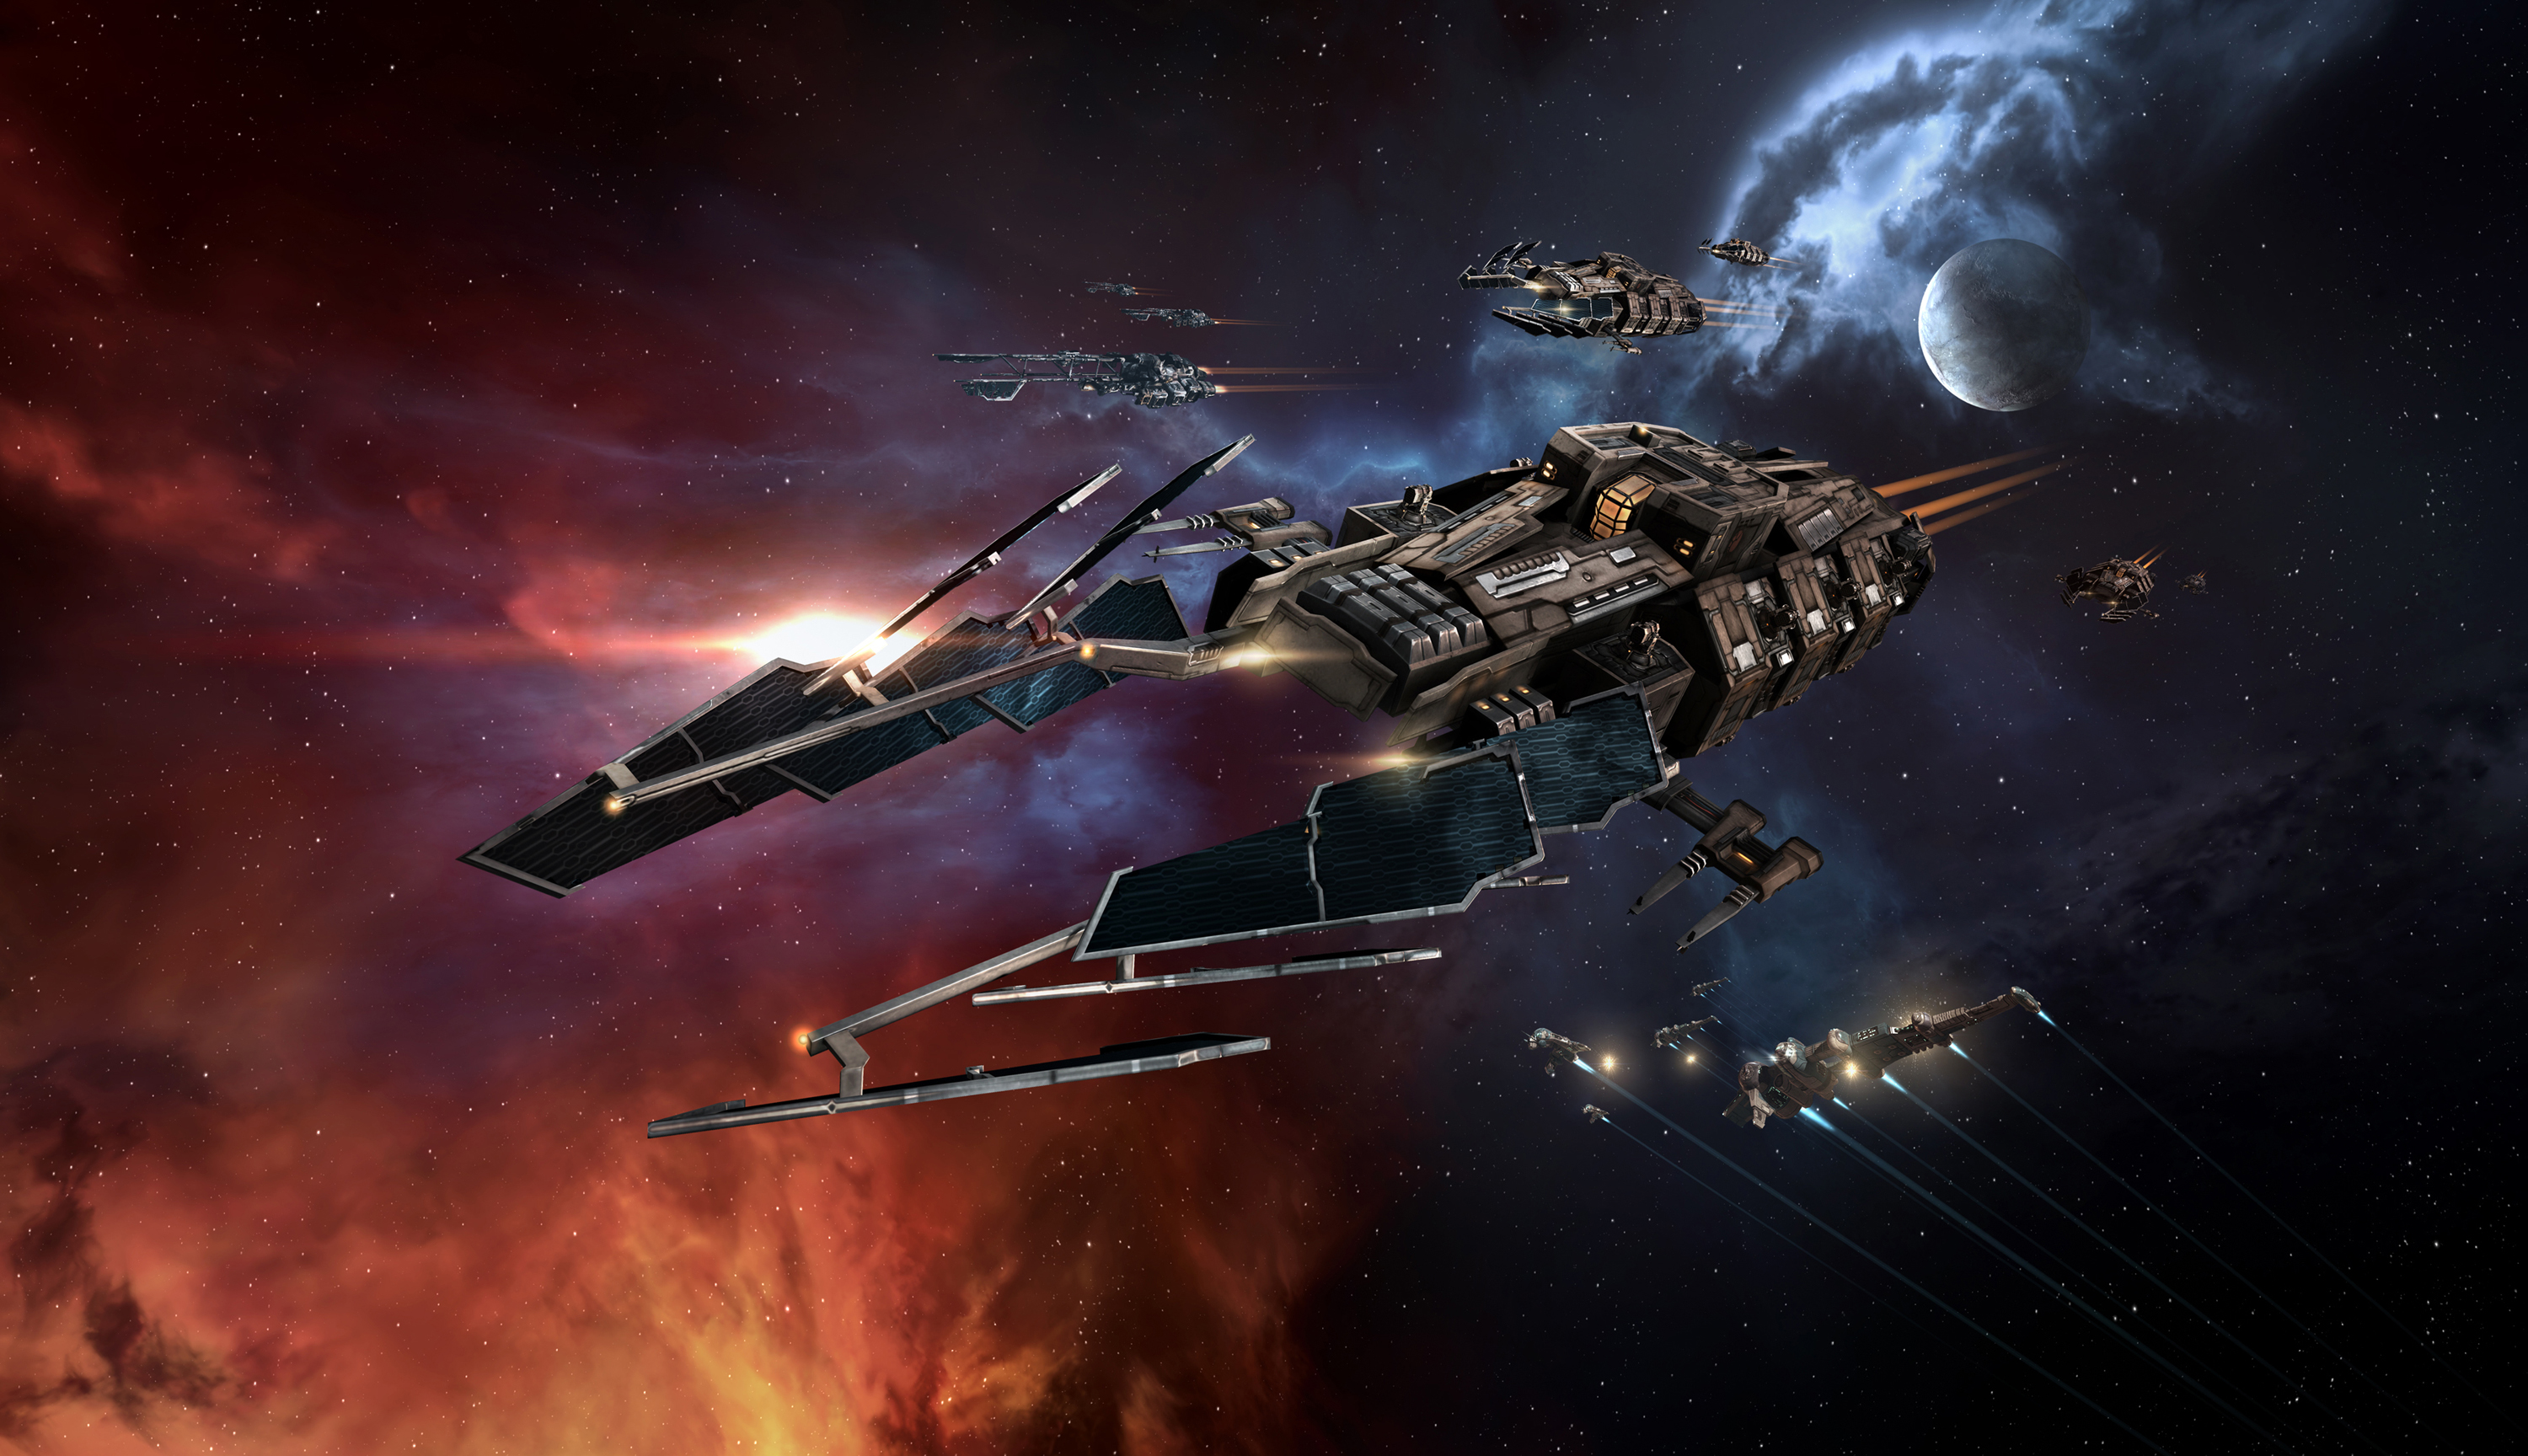 eve online wallpaper,strategy video game,pc game,cg artwork,space,spacecraft